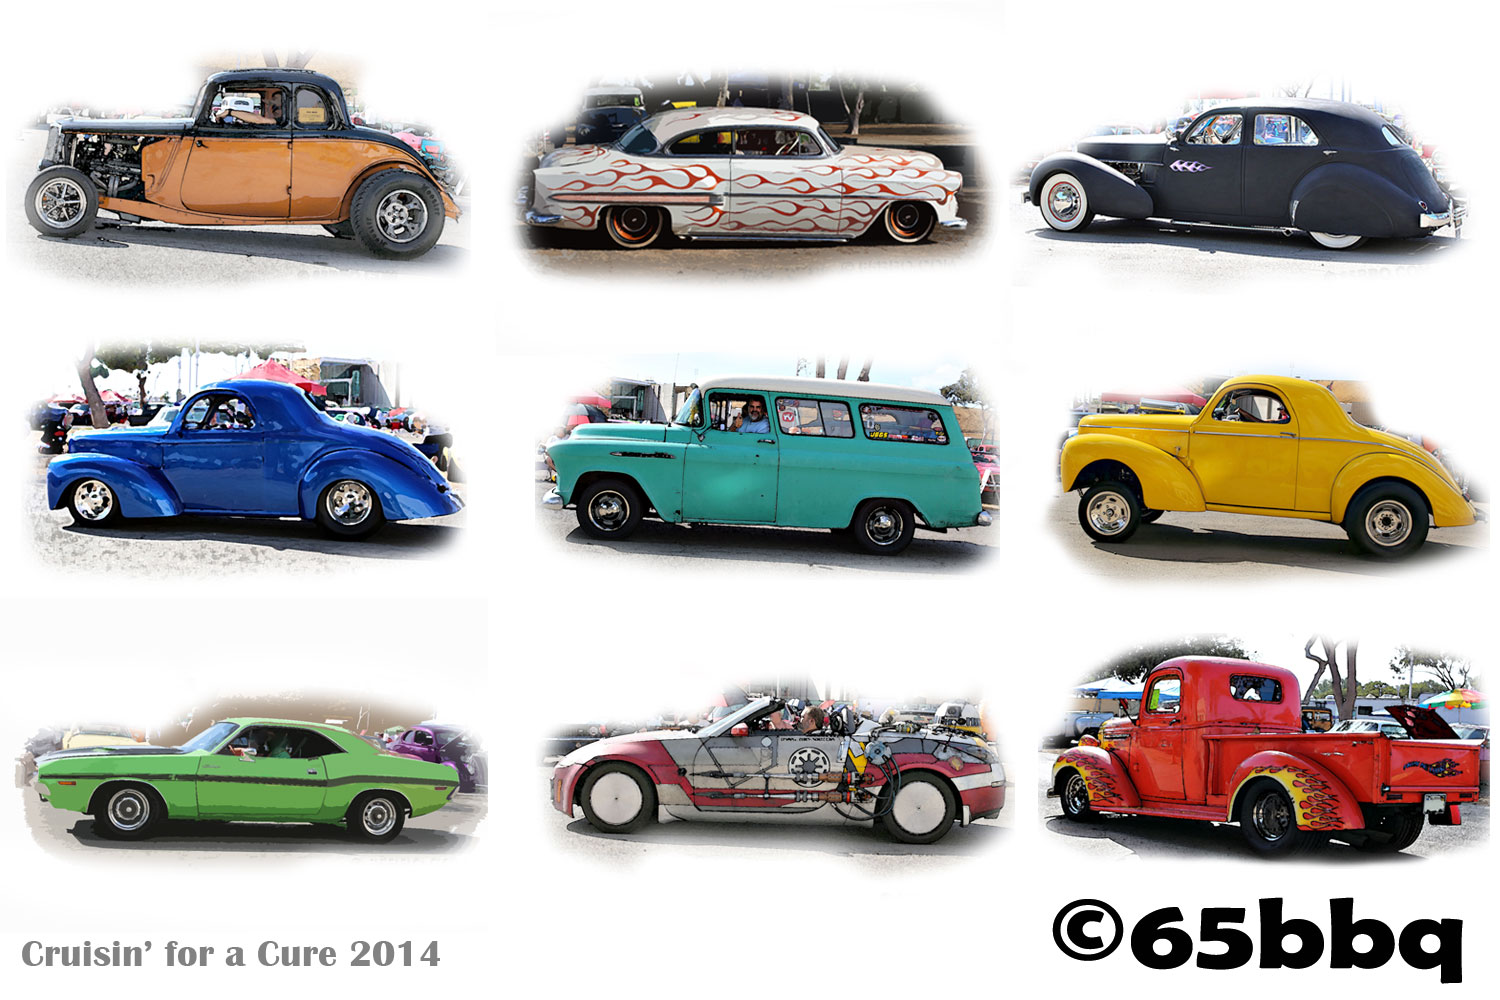 cruisin-for-a-cure-2014-the-ranchero-and-the-blue-q-update.jpg